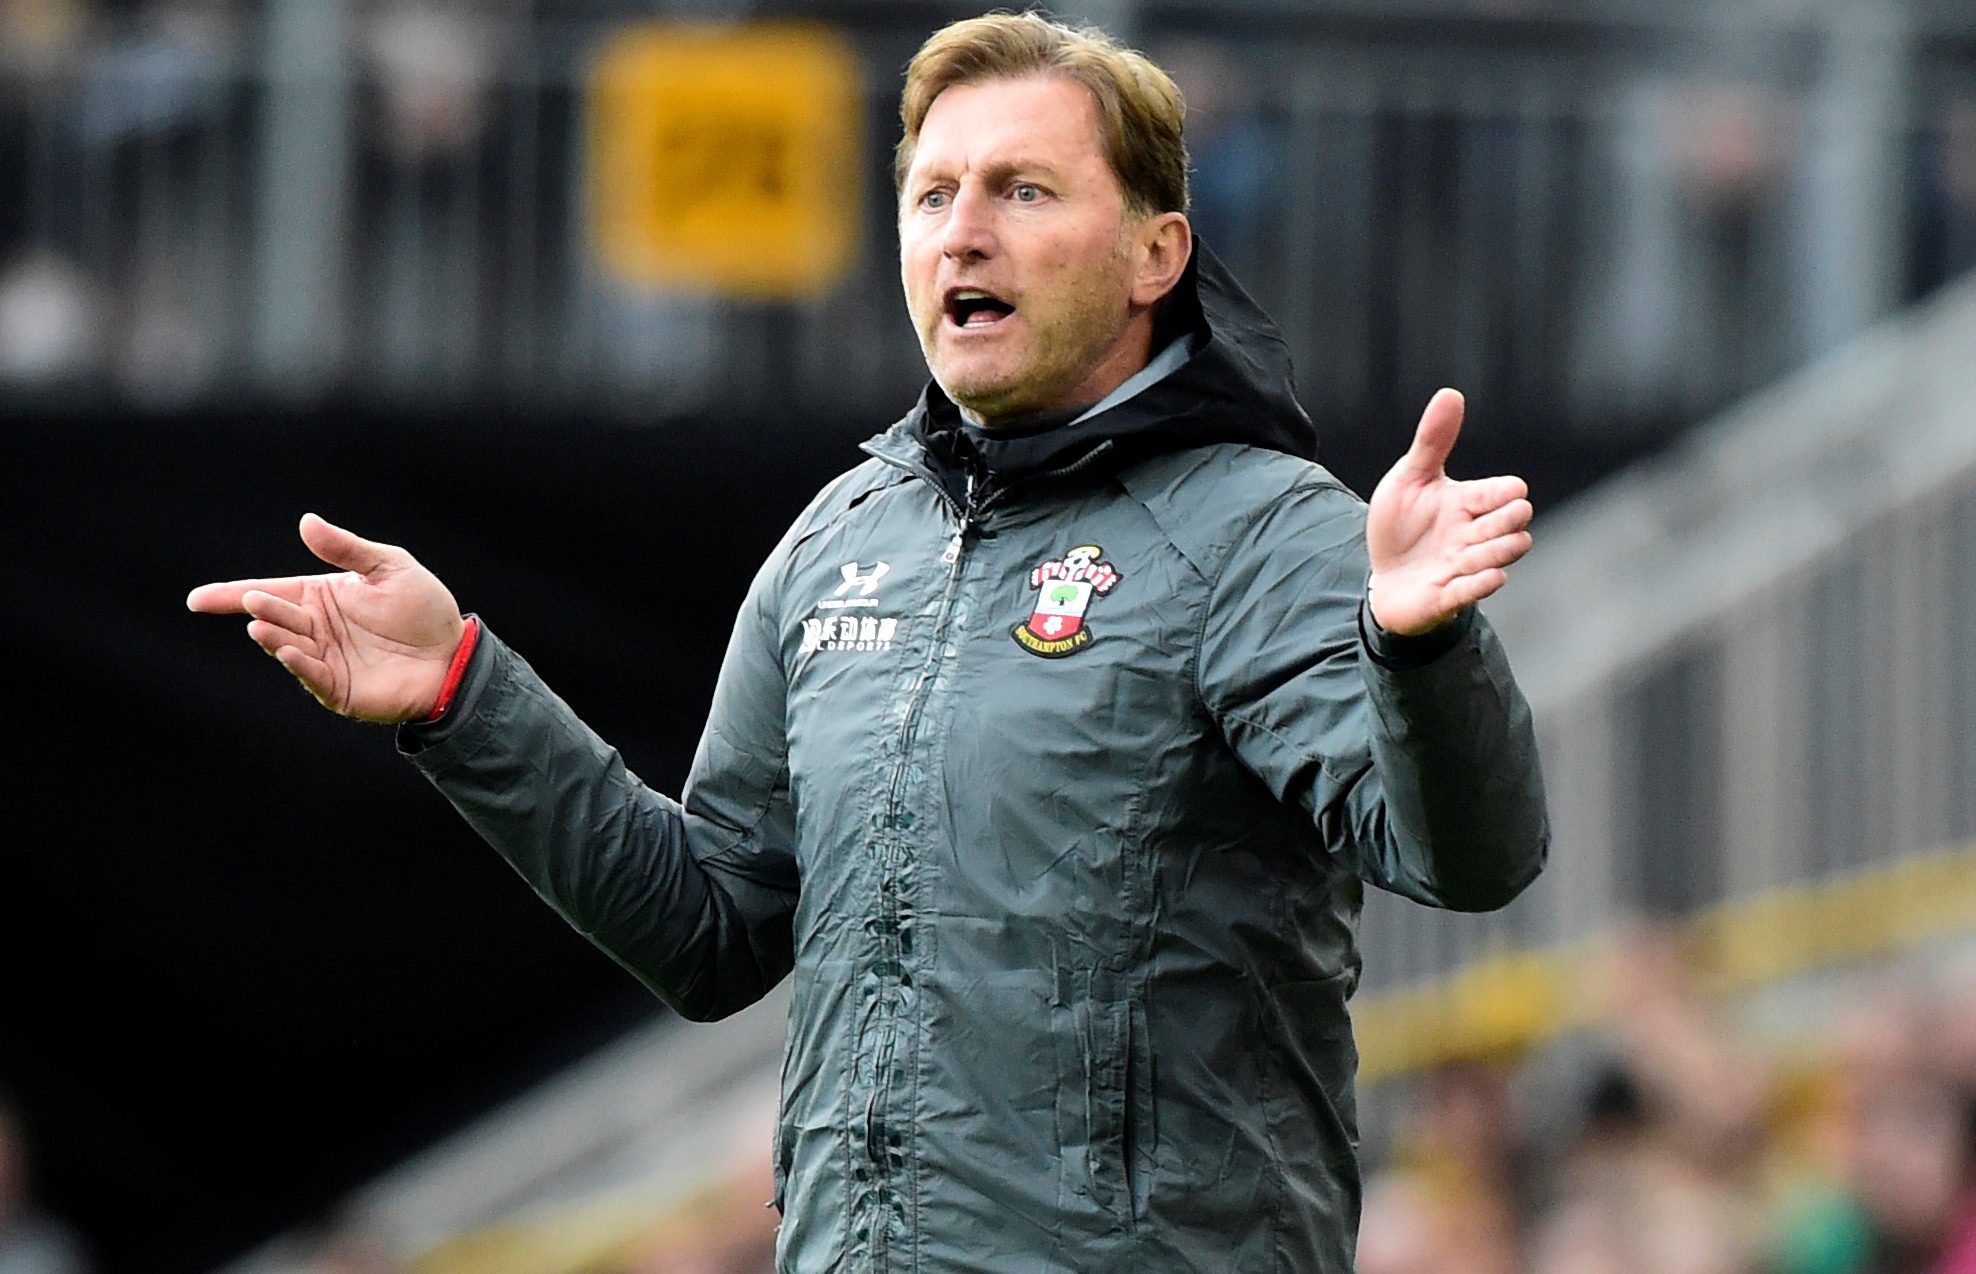 Soccer Football - Premier League - Wolverhampton Wanderers v Southampton - Molineux Stadium, Wolverhampton, Britain - October 19, 2019  Southampton manager Ralph Hasenhuttl reacts   REUTERS/Rebecca Naden  EDITORIAL USE ONLY. No use with unauthorized audio, video, data, fixture lists, club/league logos or 